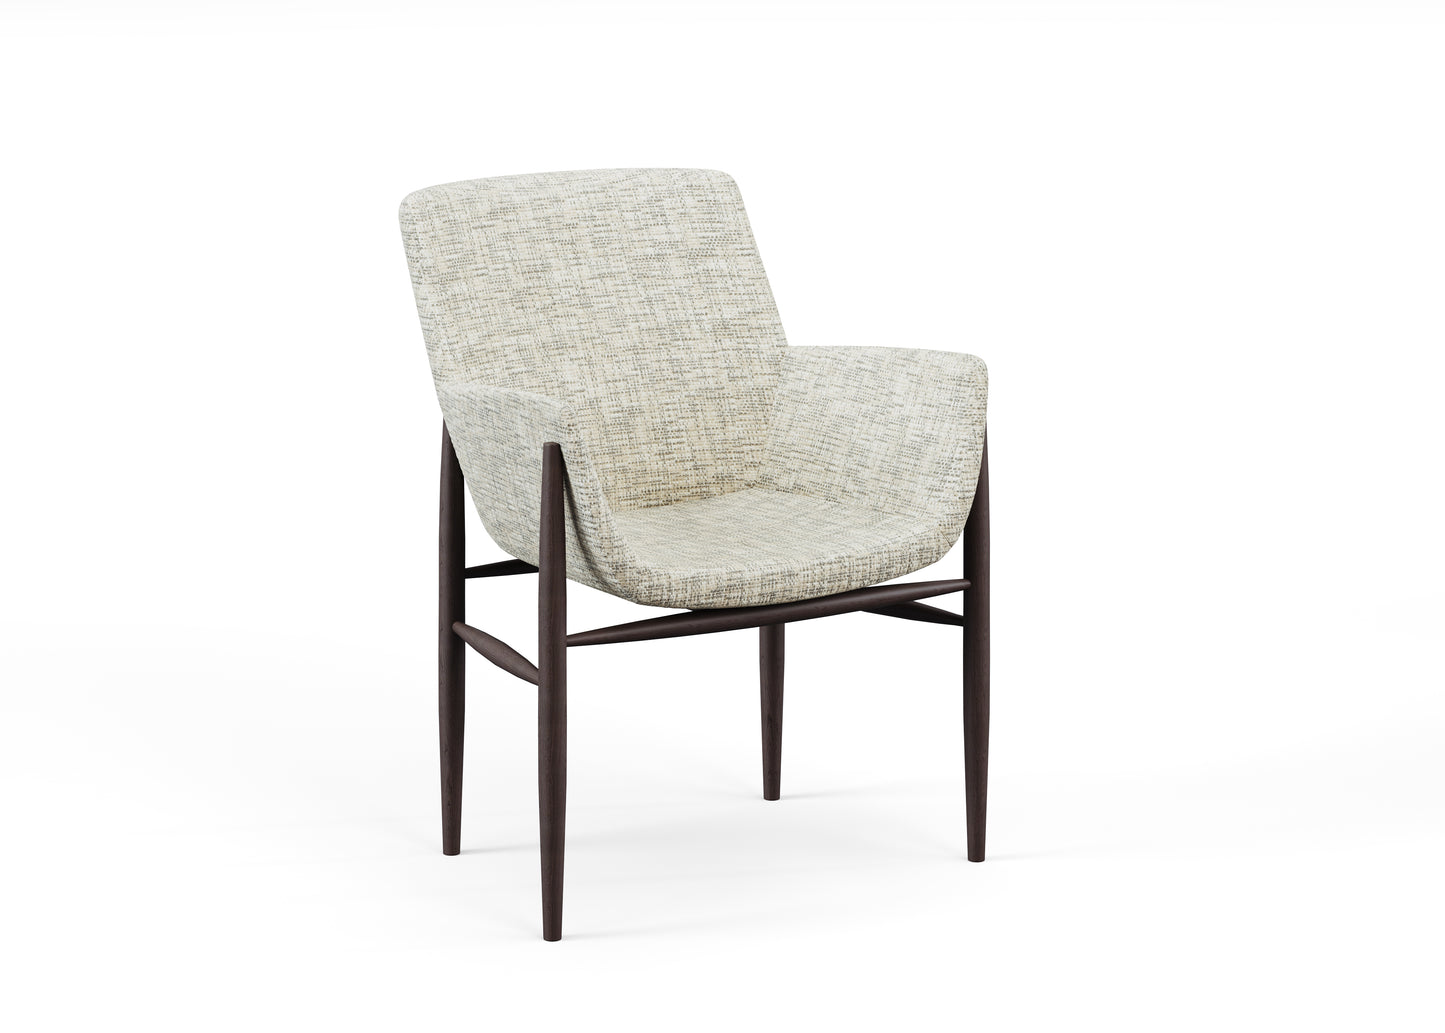 Sparks Dining & Study chair